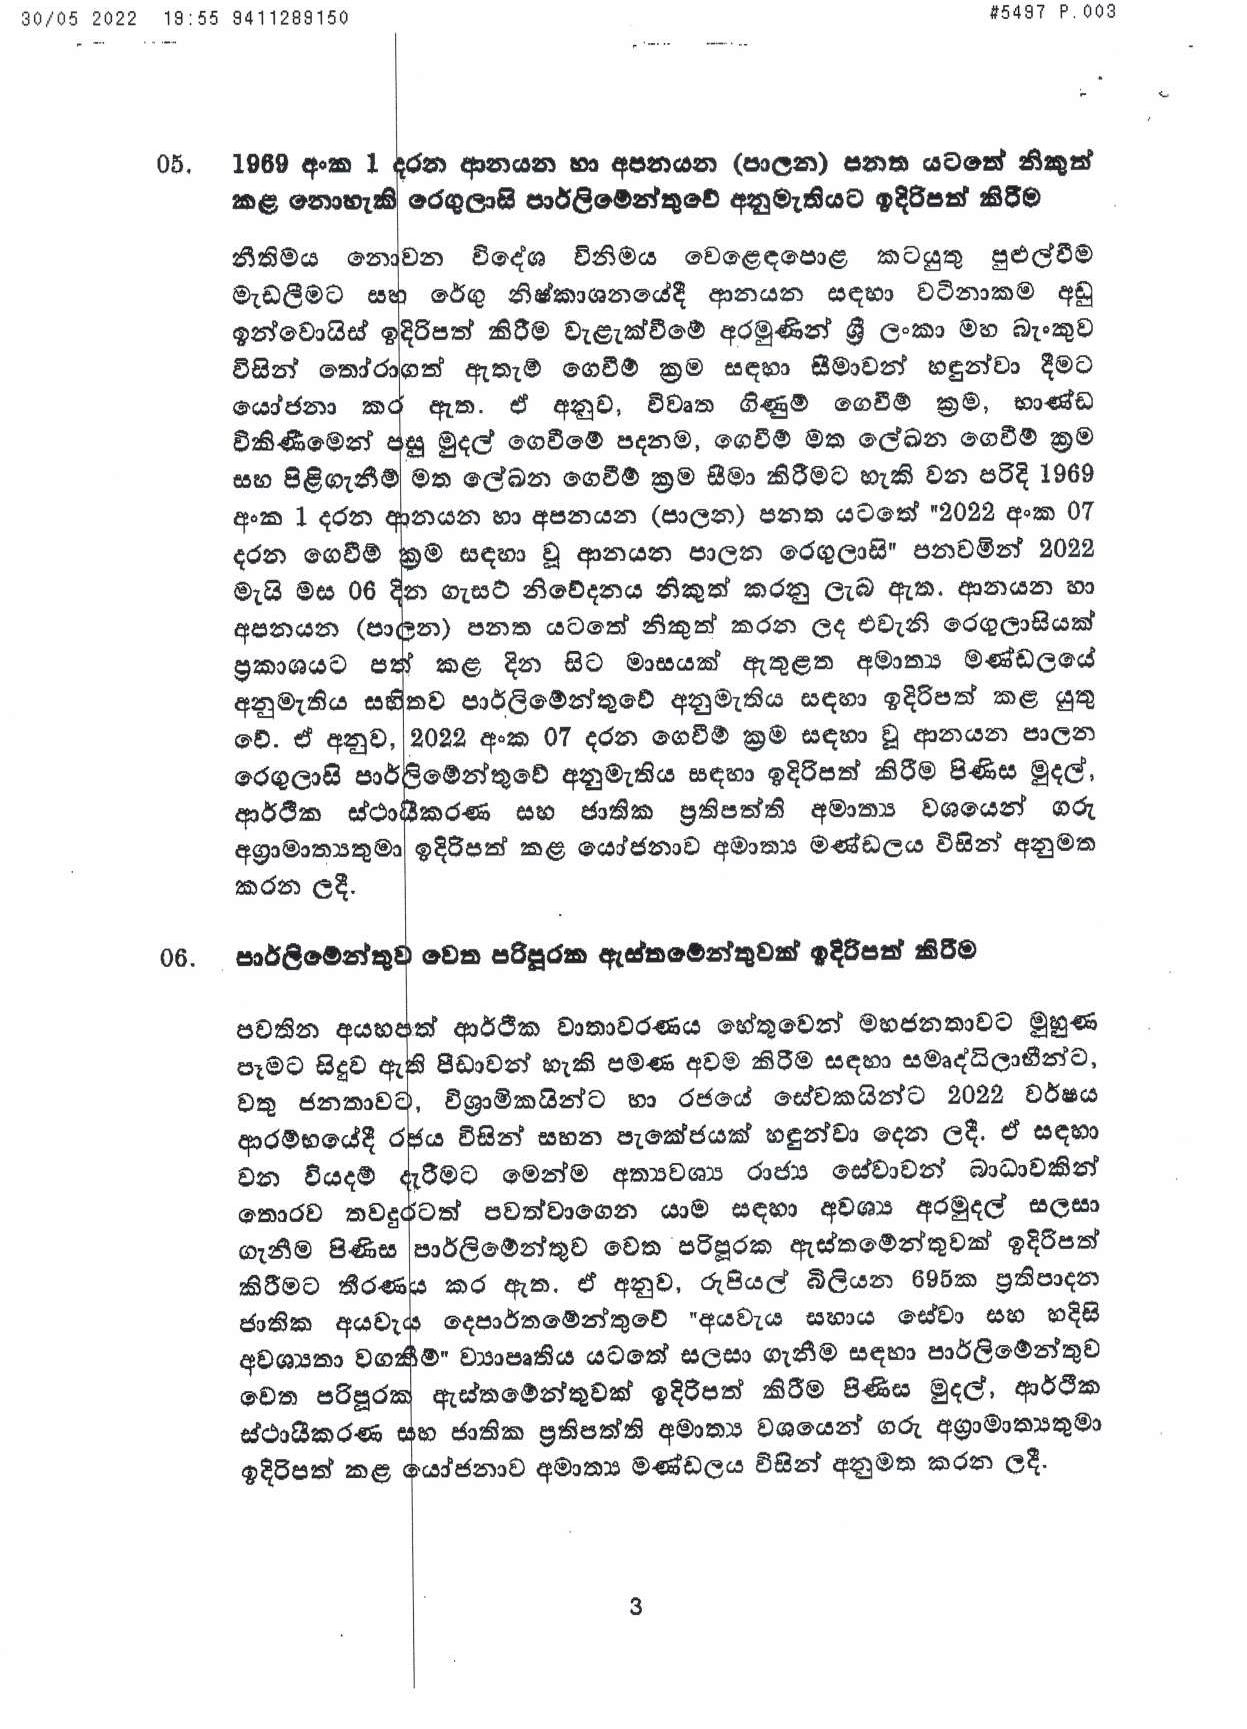 Cabinet Decisions on 30.05.2022 S page 003